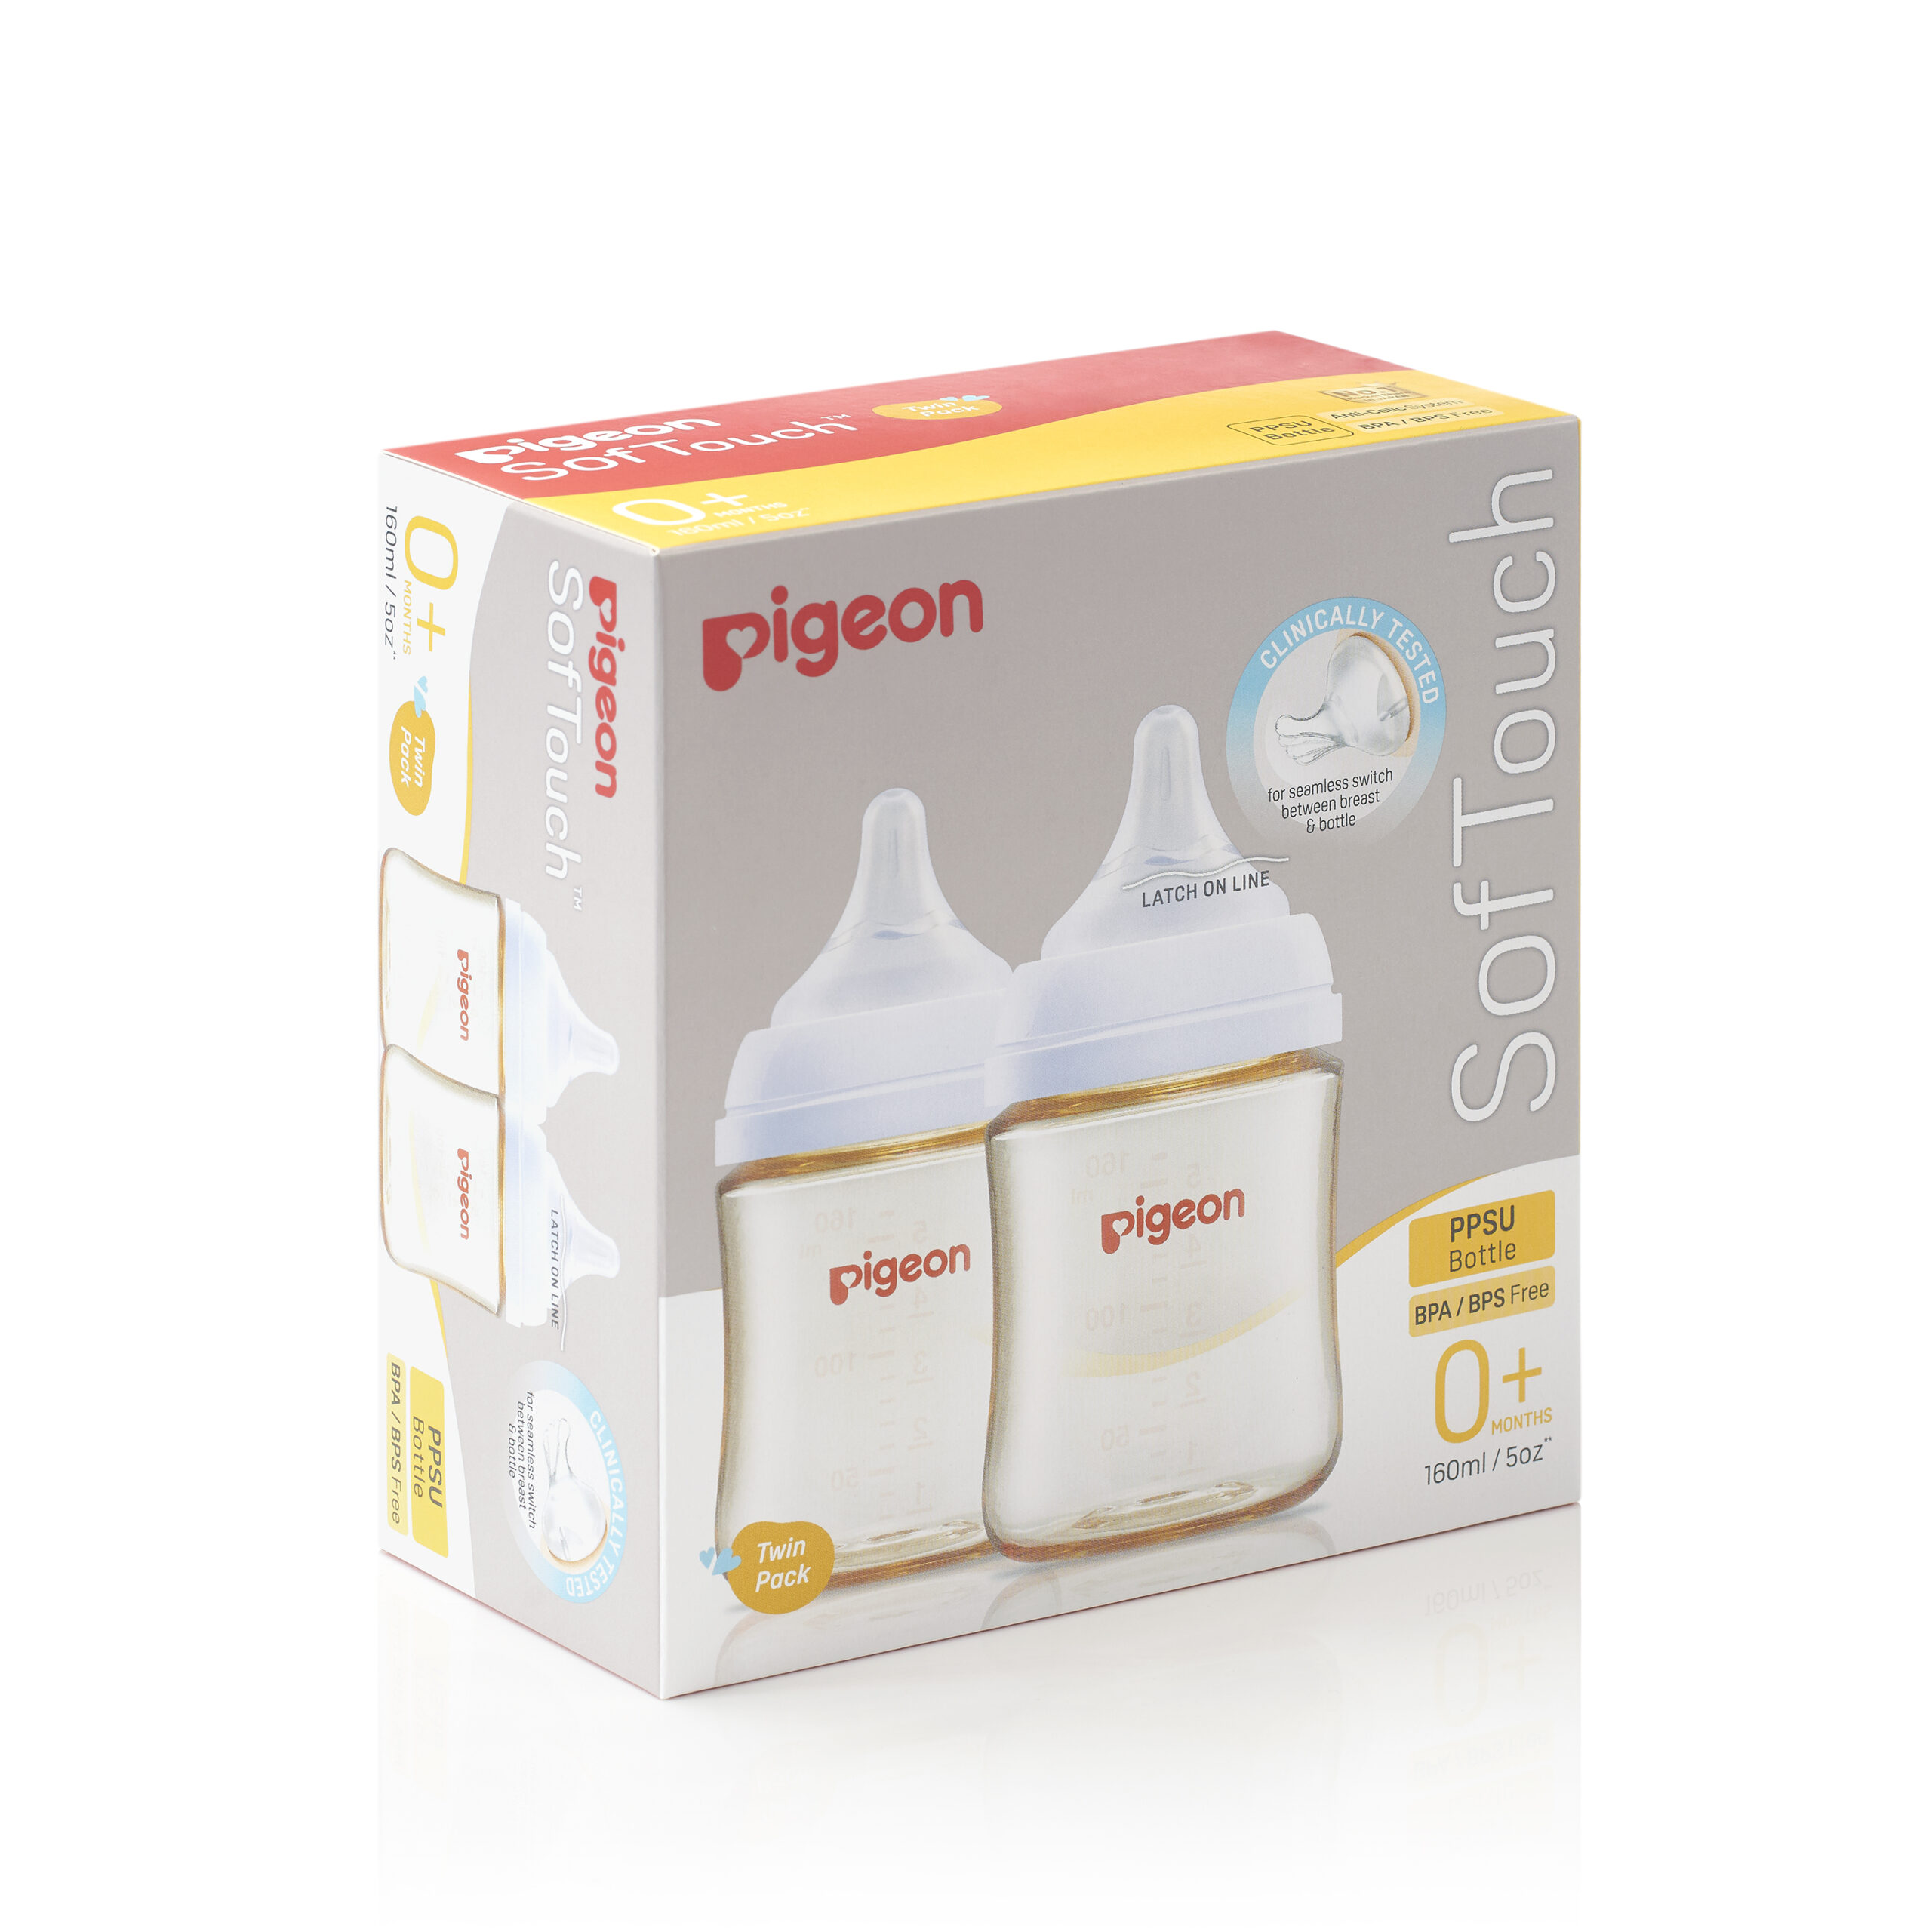 Pigeon SofTouch 3 Nursing Bottle Twin Pack PPSU 160ml (PG-79440)